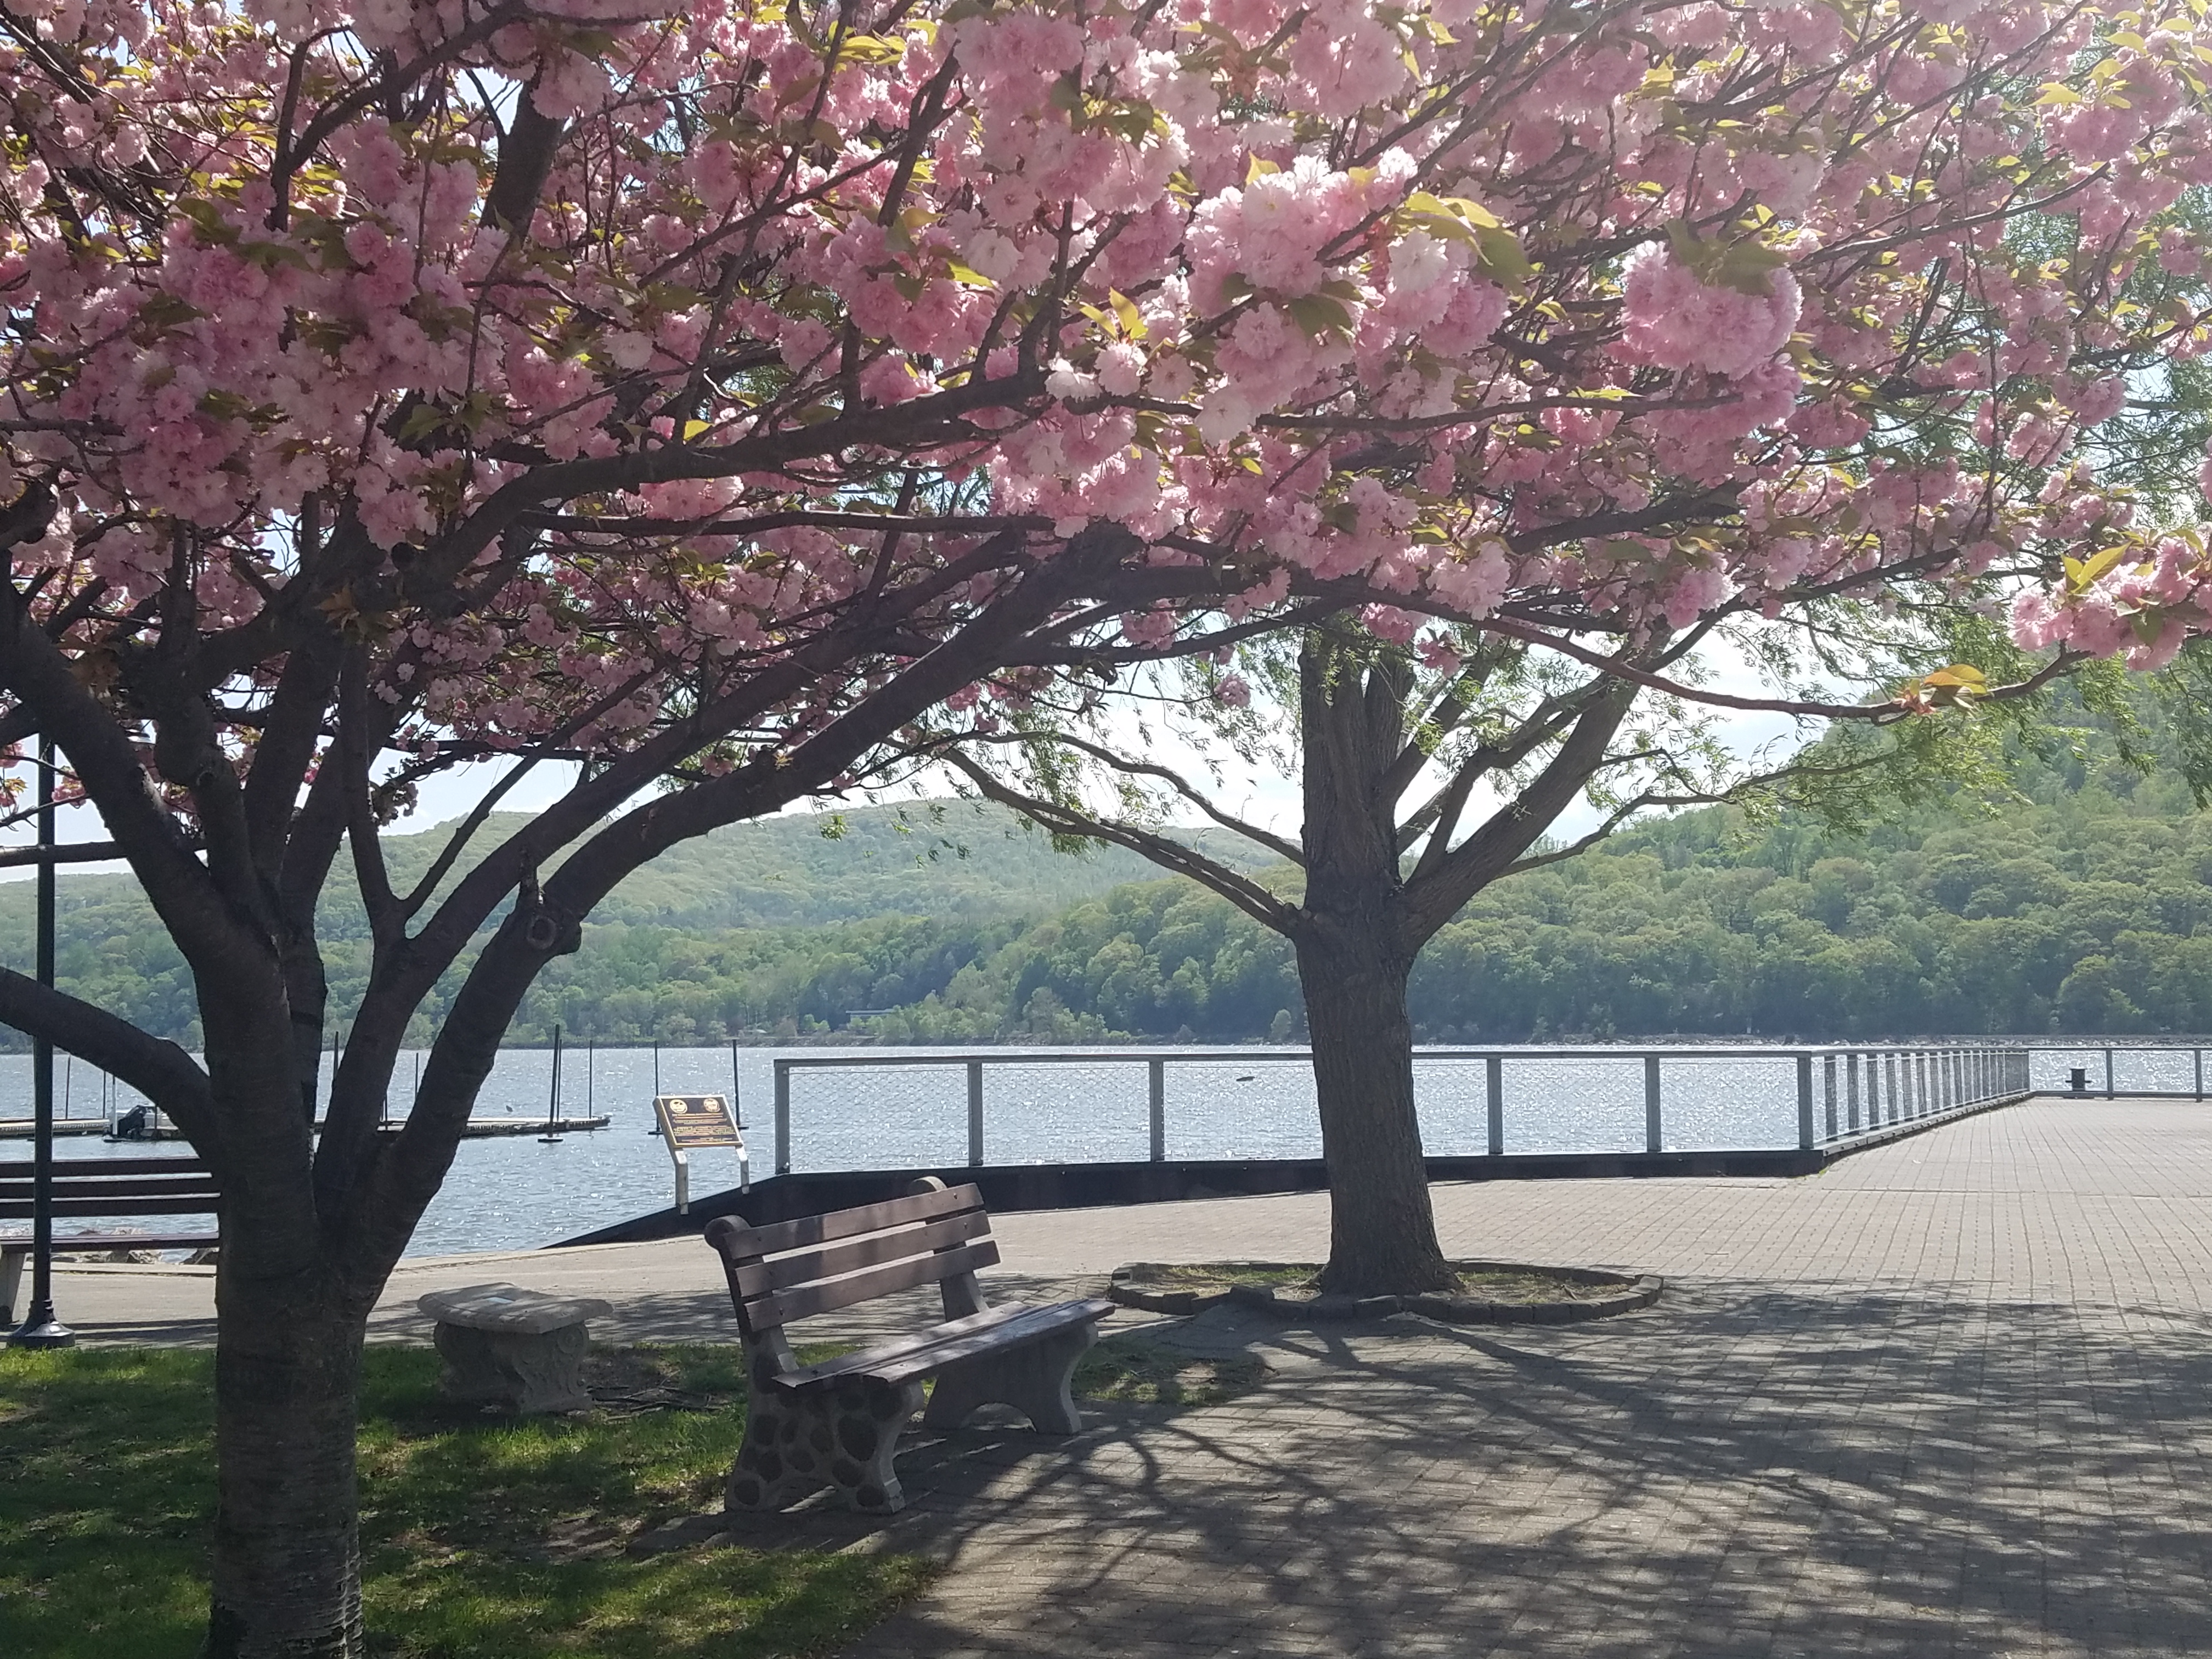 Daycation: Anniversary Trip to Cold Spring, NY